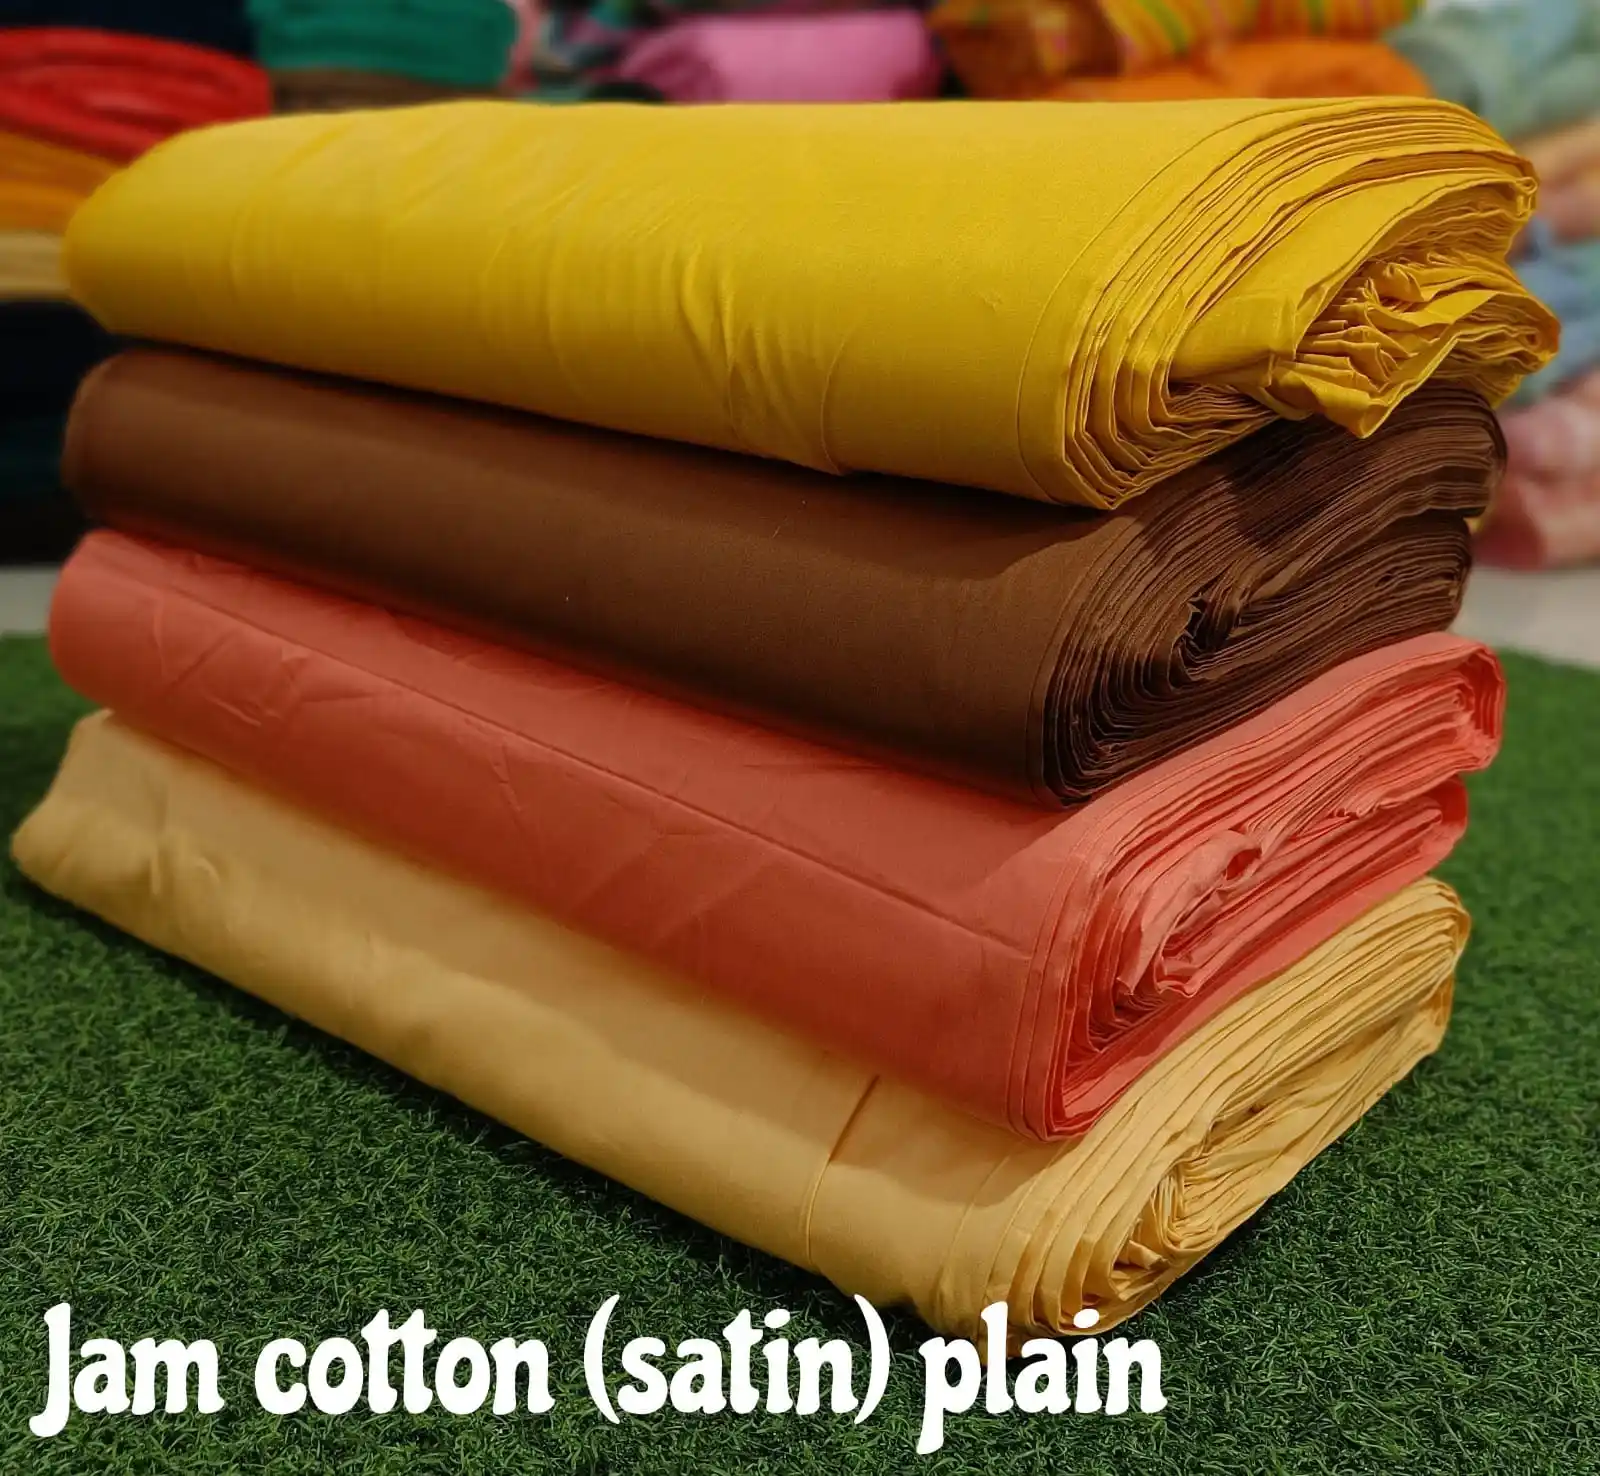 Natural Cotton Satin Fabric By The Yard Jam Cotton Satin Fabric For Dress Making